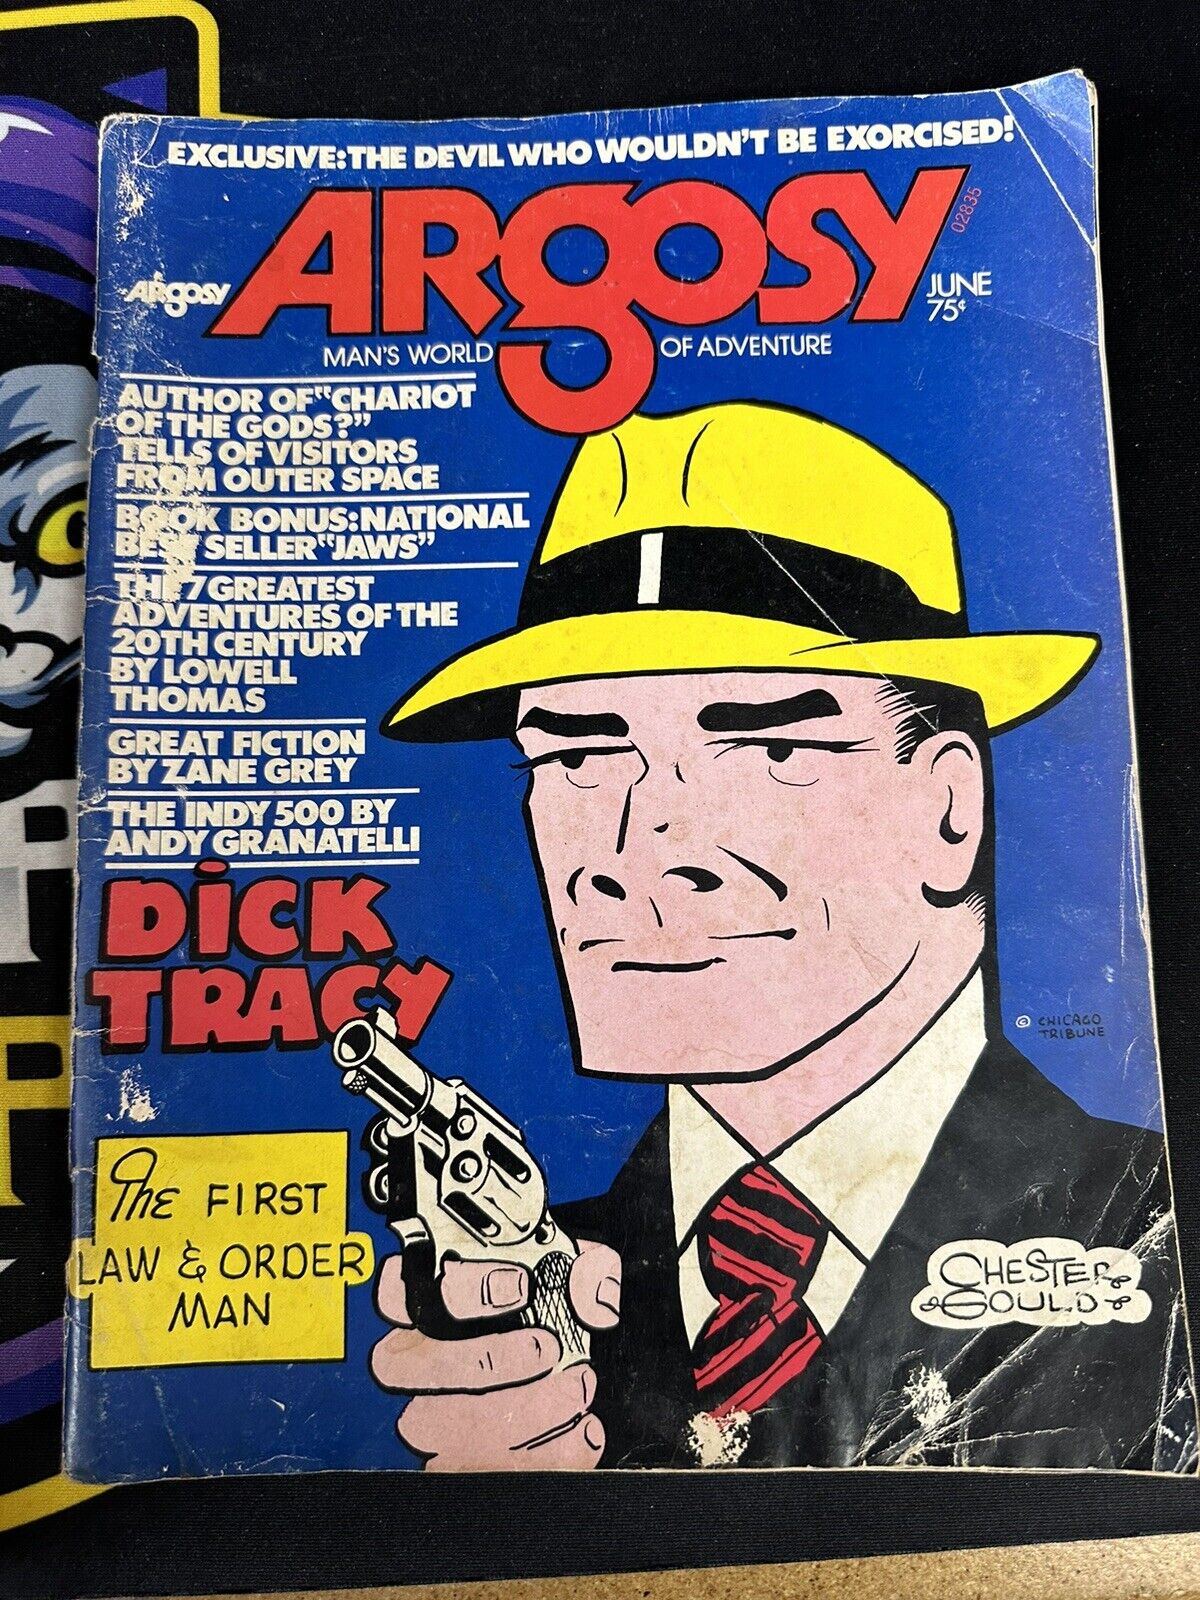 Argosy 6/1974-Popular-Chester Gould-Dick Tracy-Zane Grey-Peter Banchle